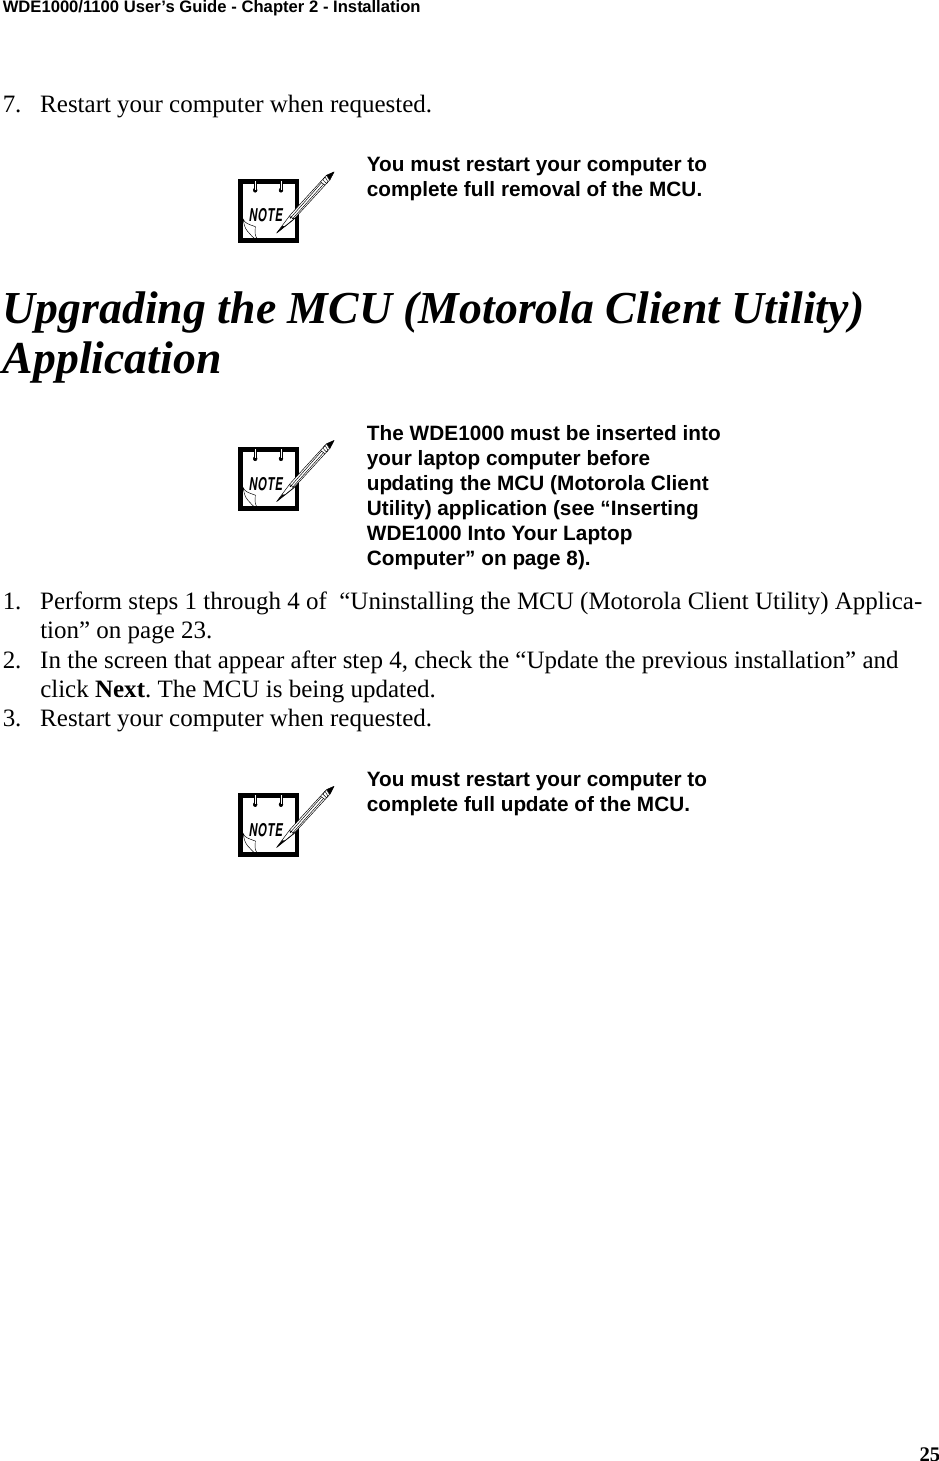 25WDE1000/1100 User’s Guide - Chapter 2 - Installation7. Restart your computer when requested.Upgrading the MCU (Motorola Client Utility) Application1. Perform steps 1 through 4 of  “Uninstalling the MCU (Motorola Client Utility) Applica-tion” on page 23.2. In the screen that appear after step 4, check the “Update the previous installation” and click Next. The MCU is being updated.3. Restart your computer when requested.You must restart your computer to complete full removal of the MCU.The WDE1000 must be inserted into your laptop computer before updating the MCU (Motorola Client Utility) application (see “Inserting WDE1000 Into Your Laptop Computer” on page 8).You must restart your computer to complete full update of the MCU.NOTENOTENOTE